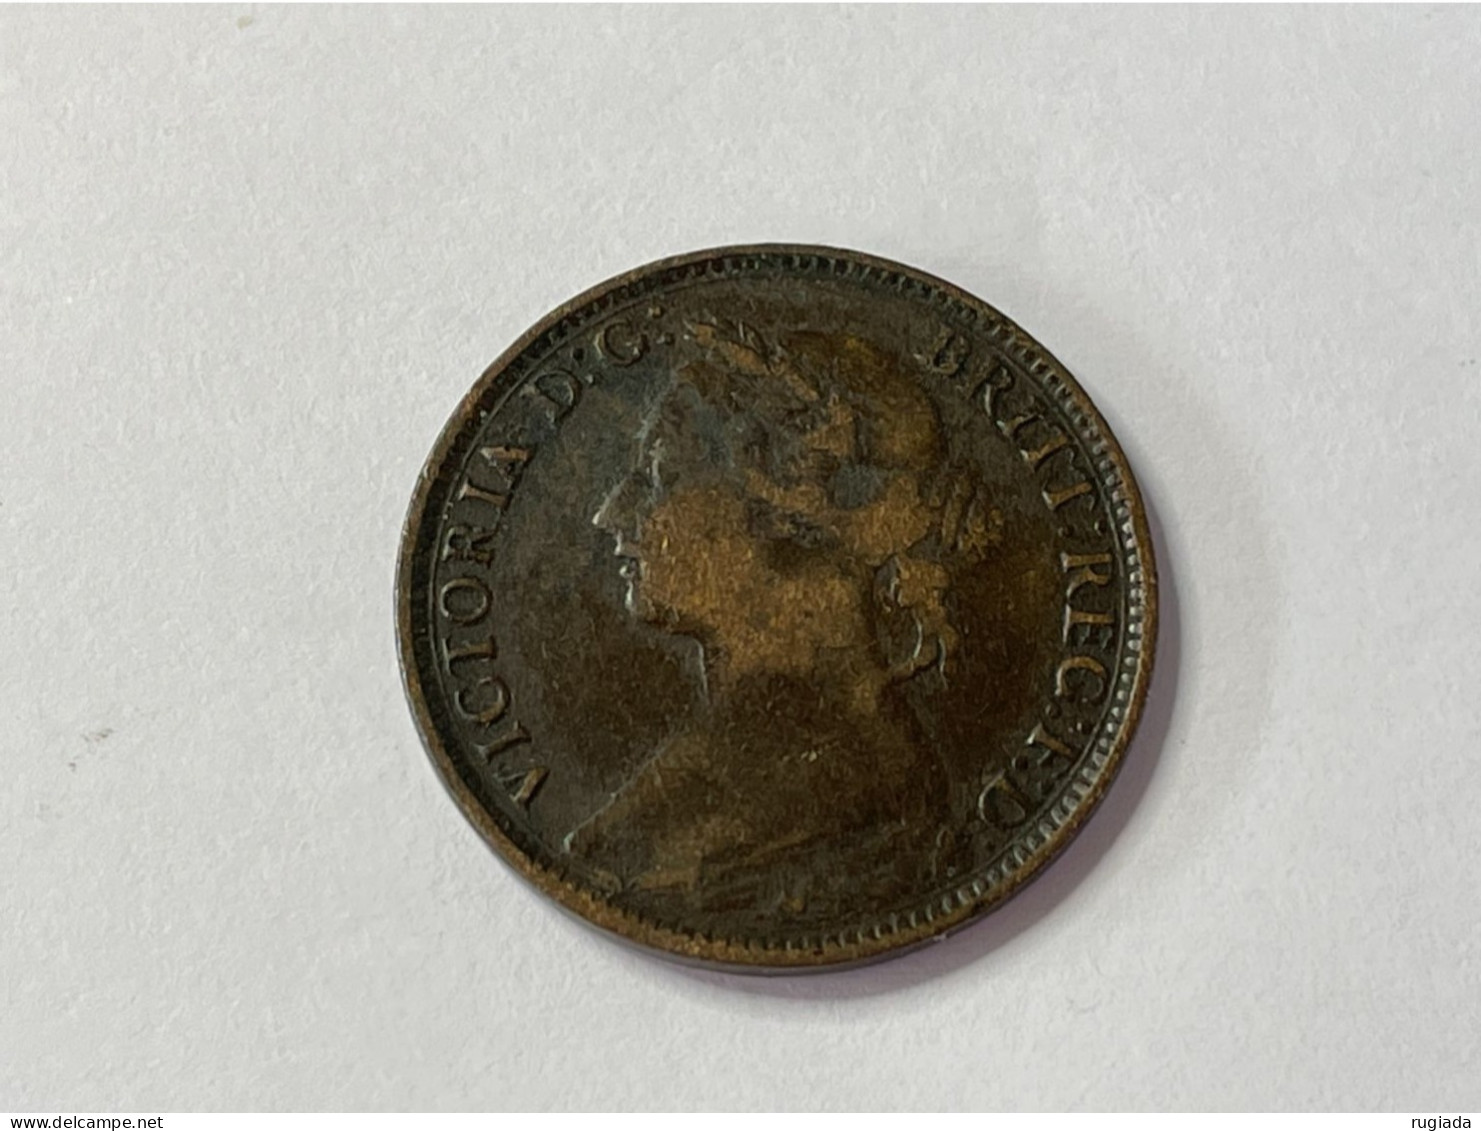 1885 Great Britain Queen Victoria Farthing Coin, F Fine - B. 1 Farthing